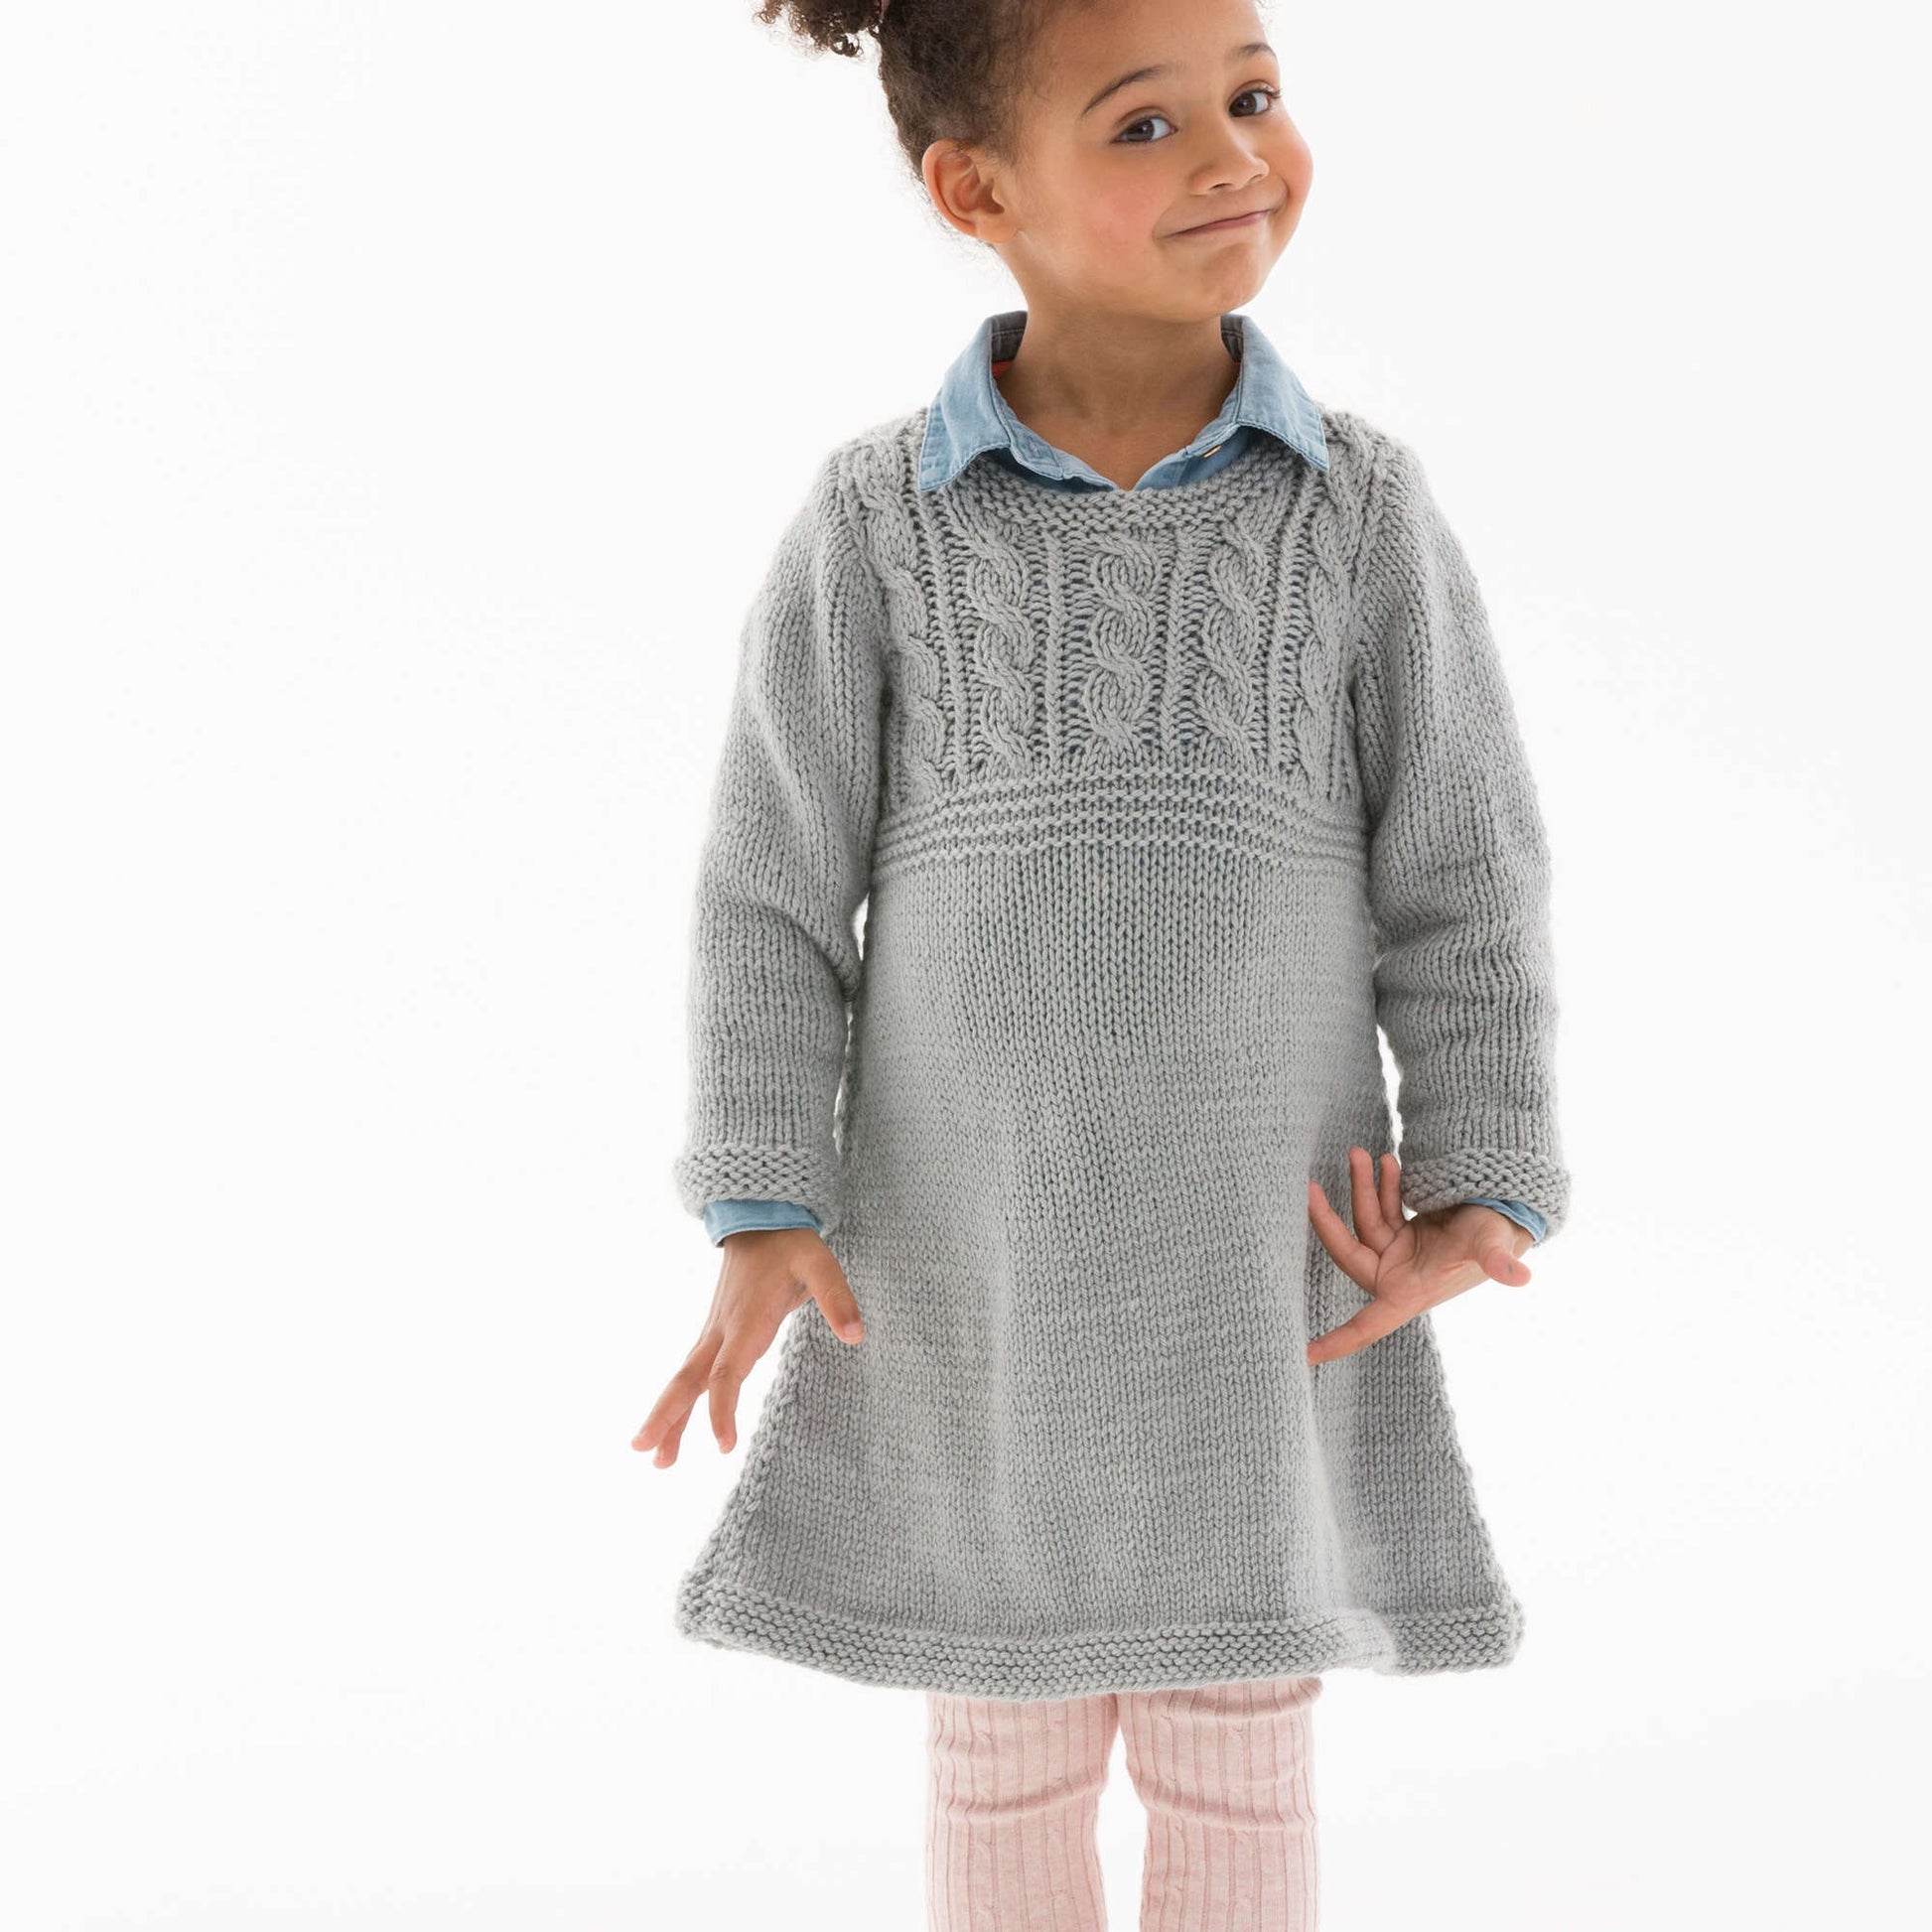 Free Red Heart Knit Cable Sweater Dress Pattern